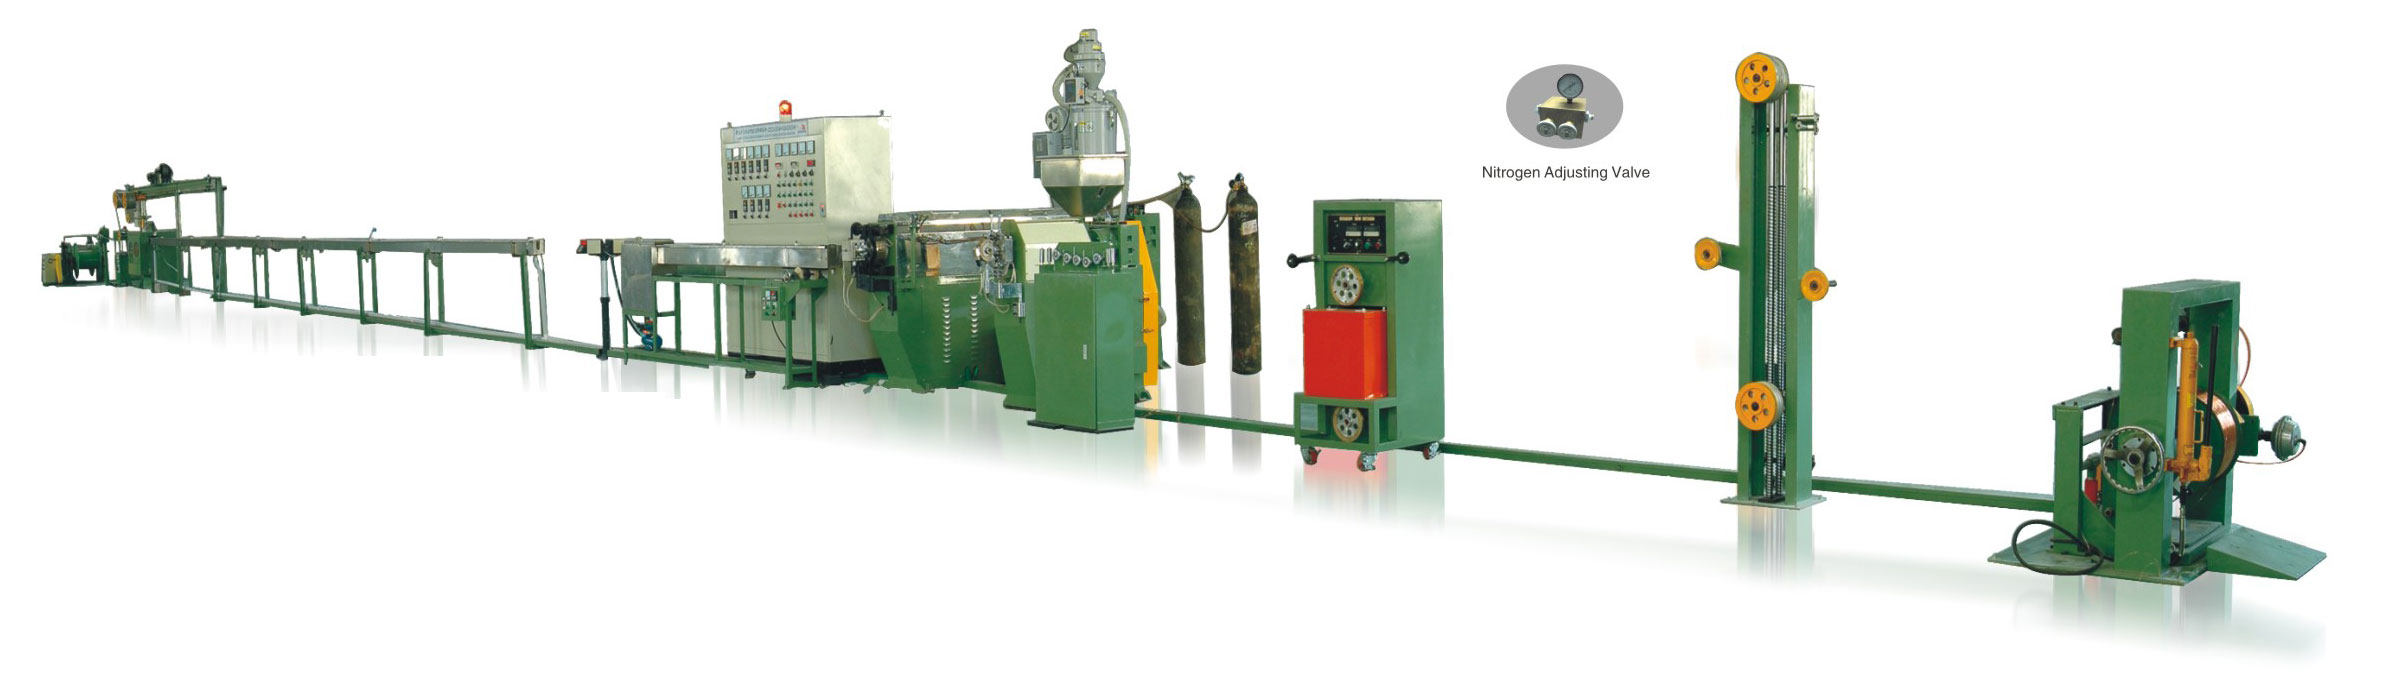 Physical-Foaming-Coaxial-Cable-Extrusion-Line-body.jpg